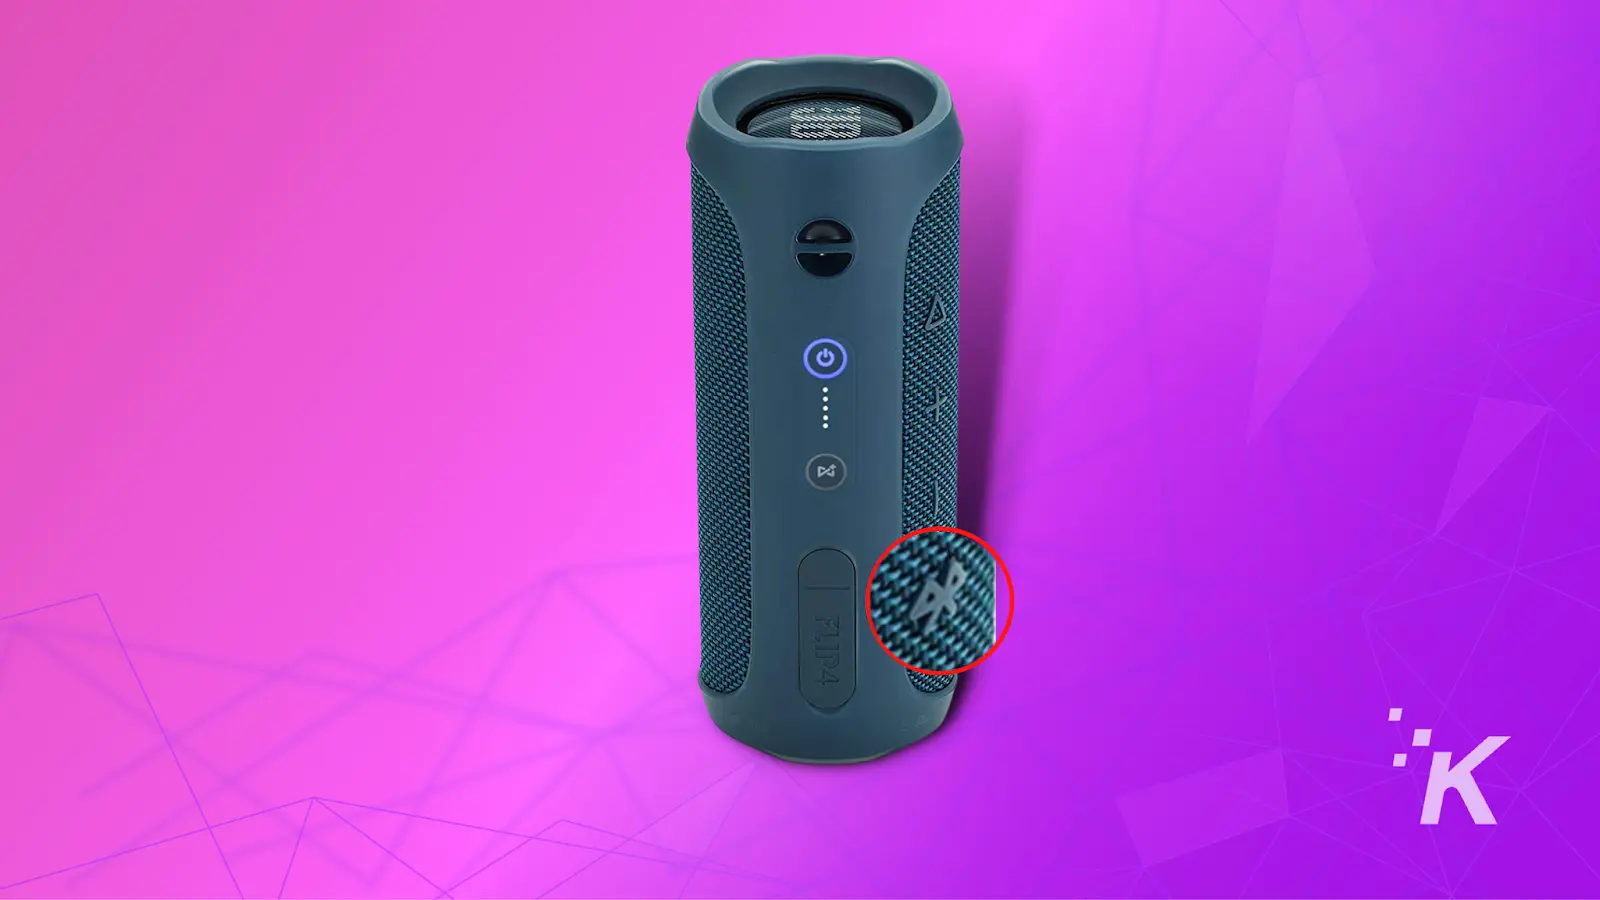 Picture of a JBL speaker on a purple background / How to connect JBL speakers to iPhone?